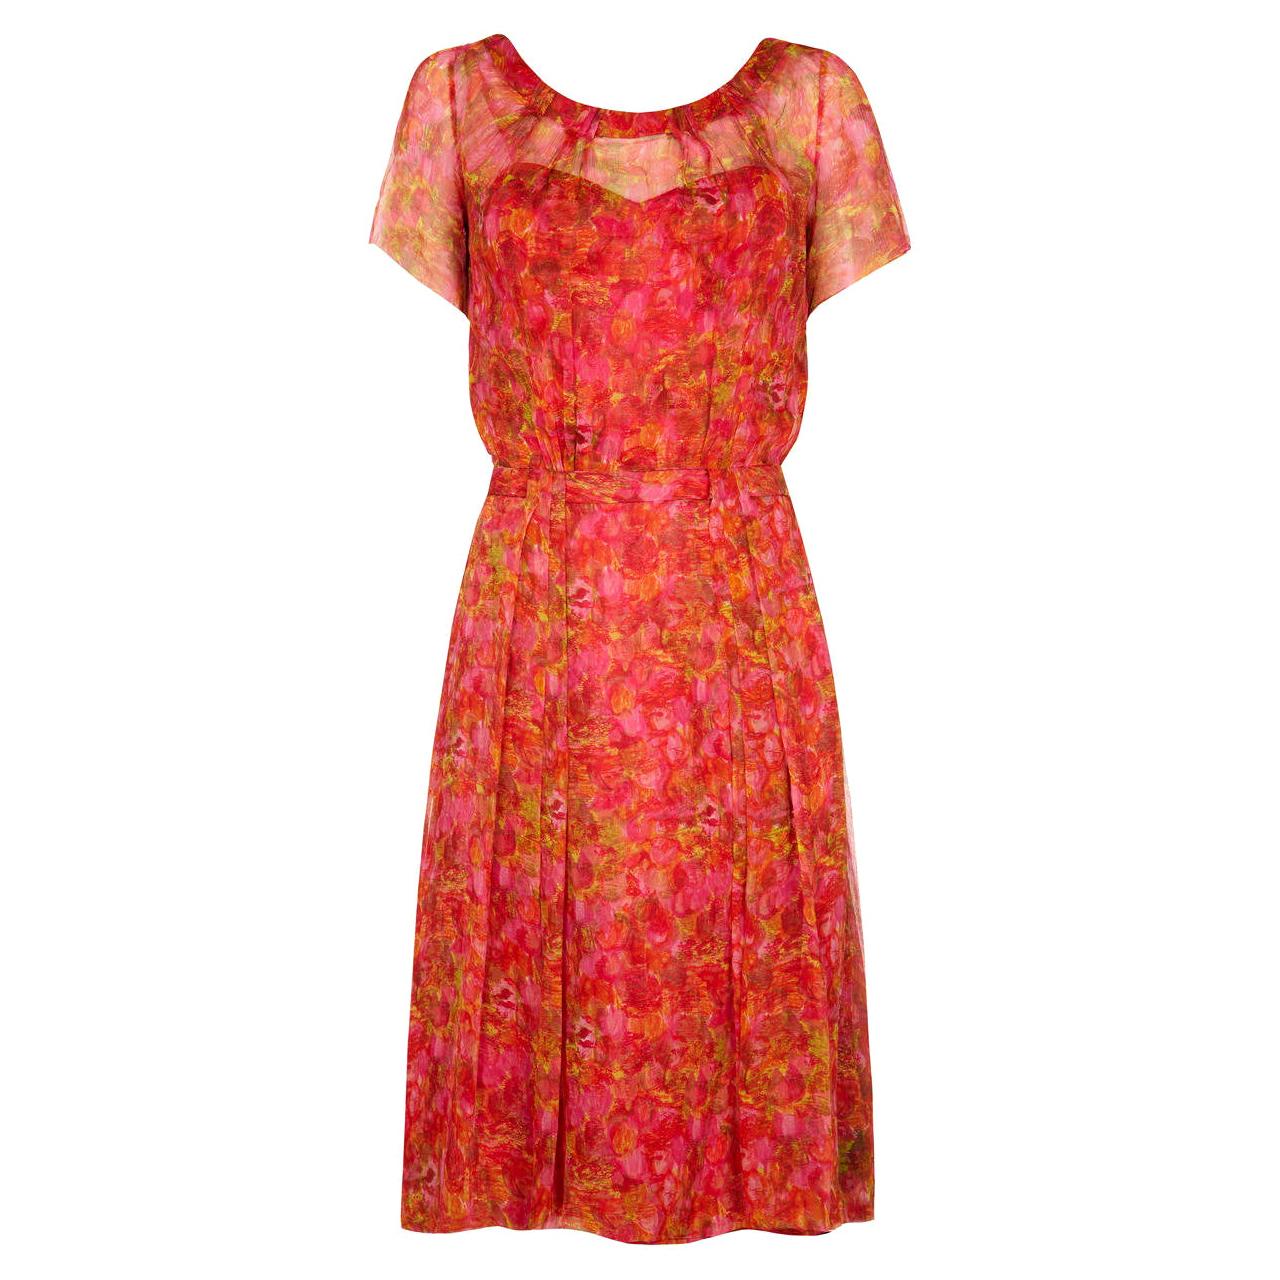 1950s Lachasse Couture Floral Printed Silk Chiffon Dress